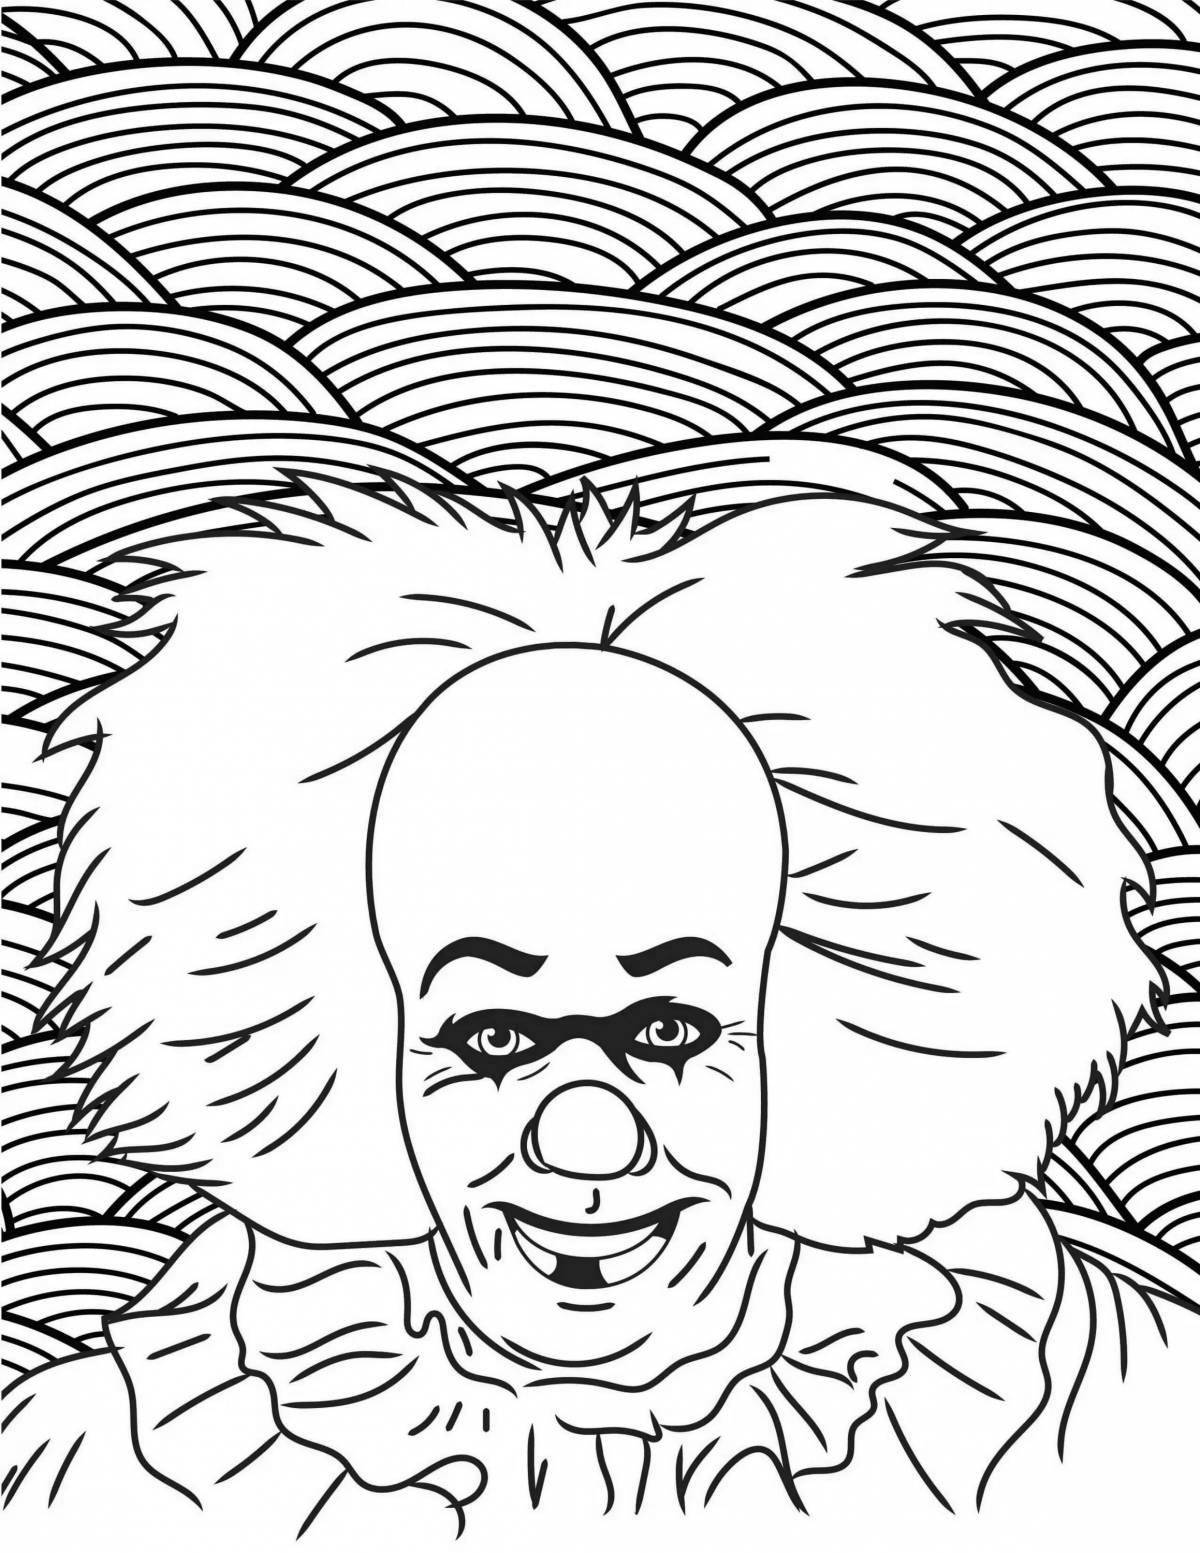 Incredible scary clown coloring book